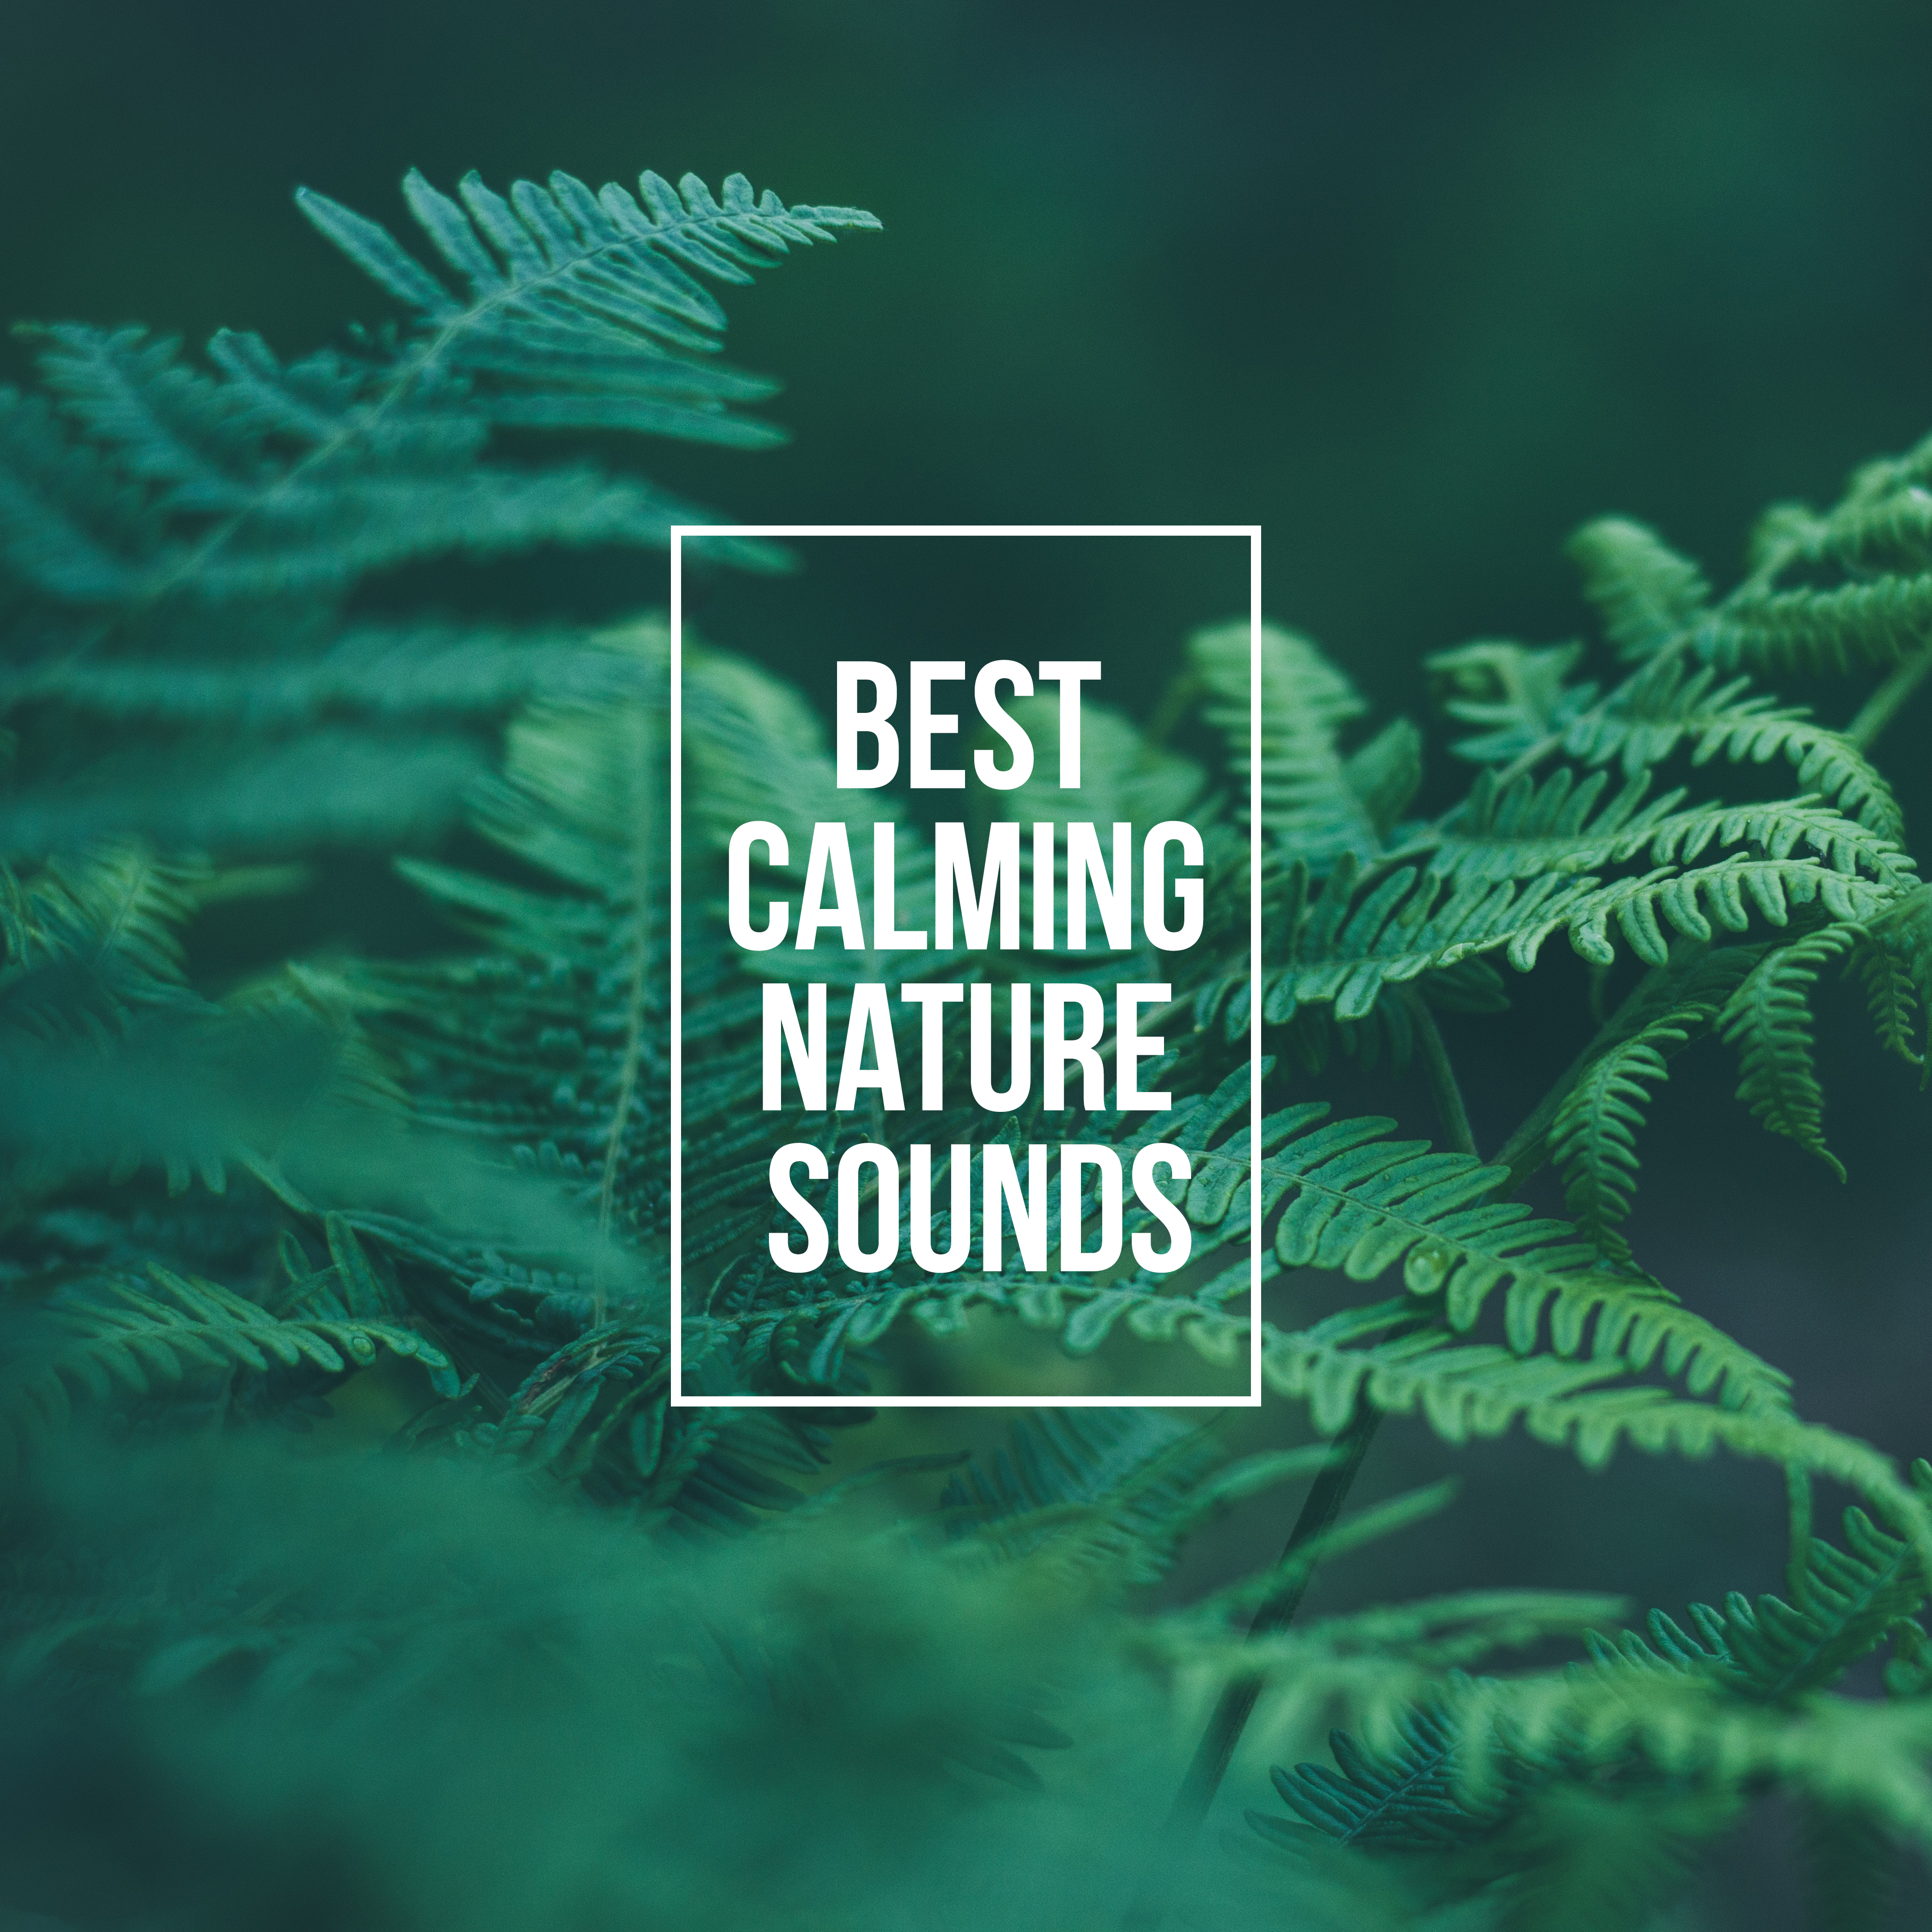 Best Calming Nature Sounds  Relax Your Body  Mind with Nature New Age Music